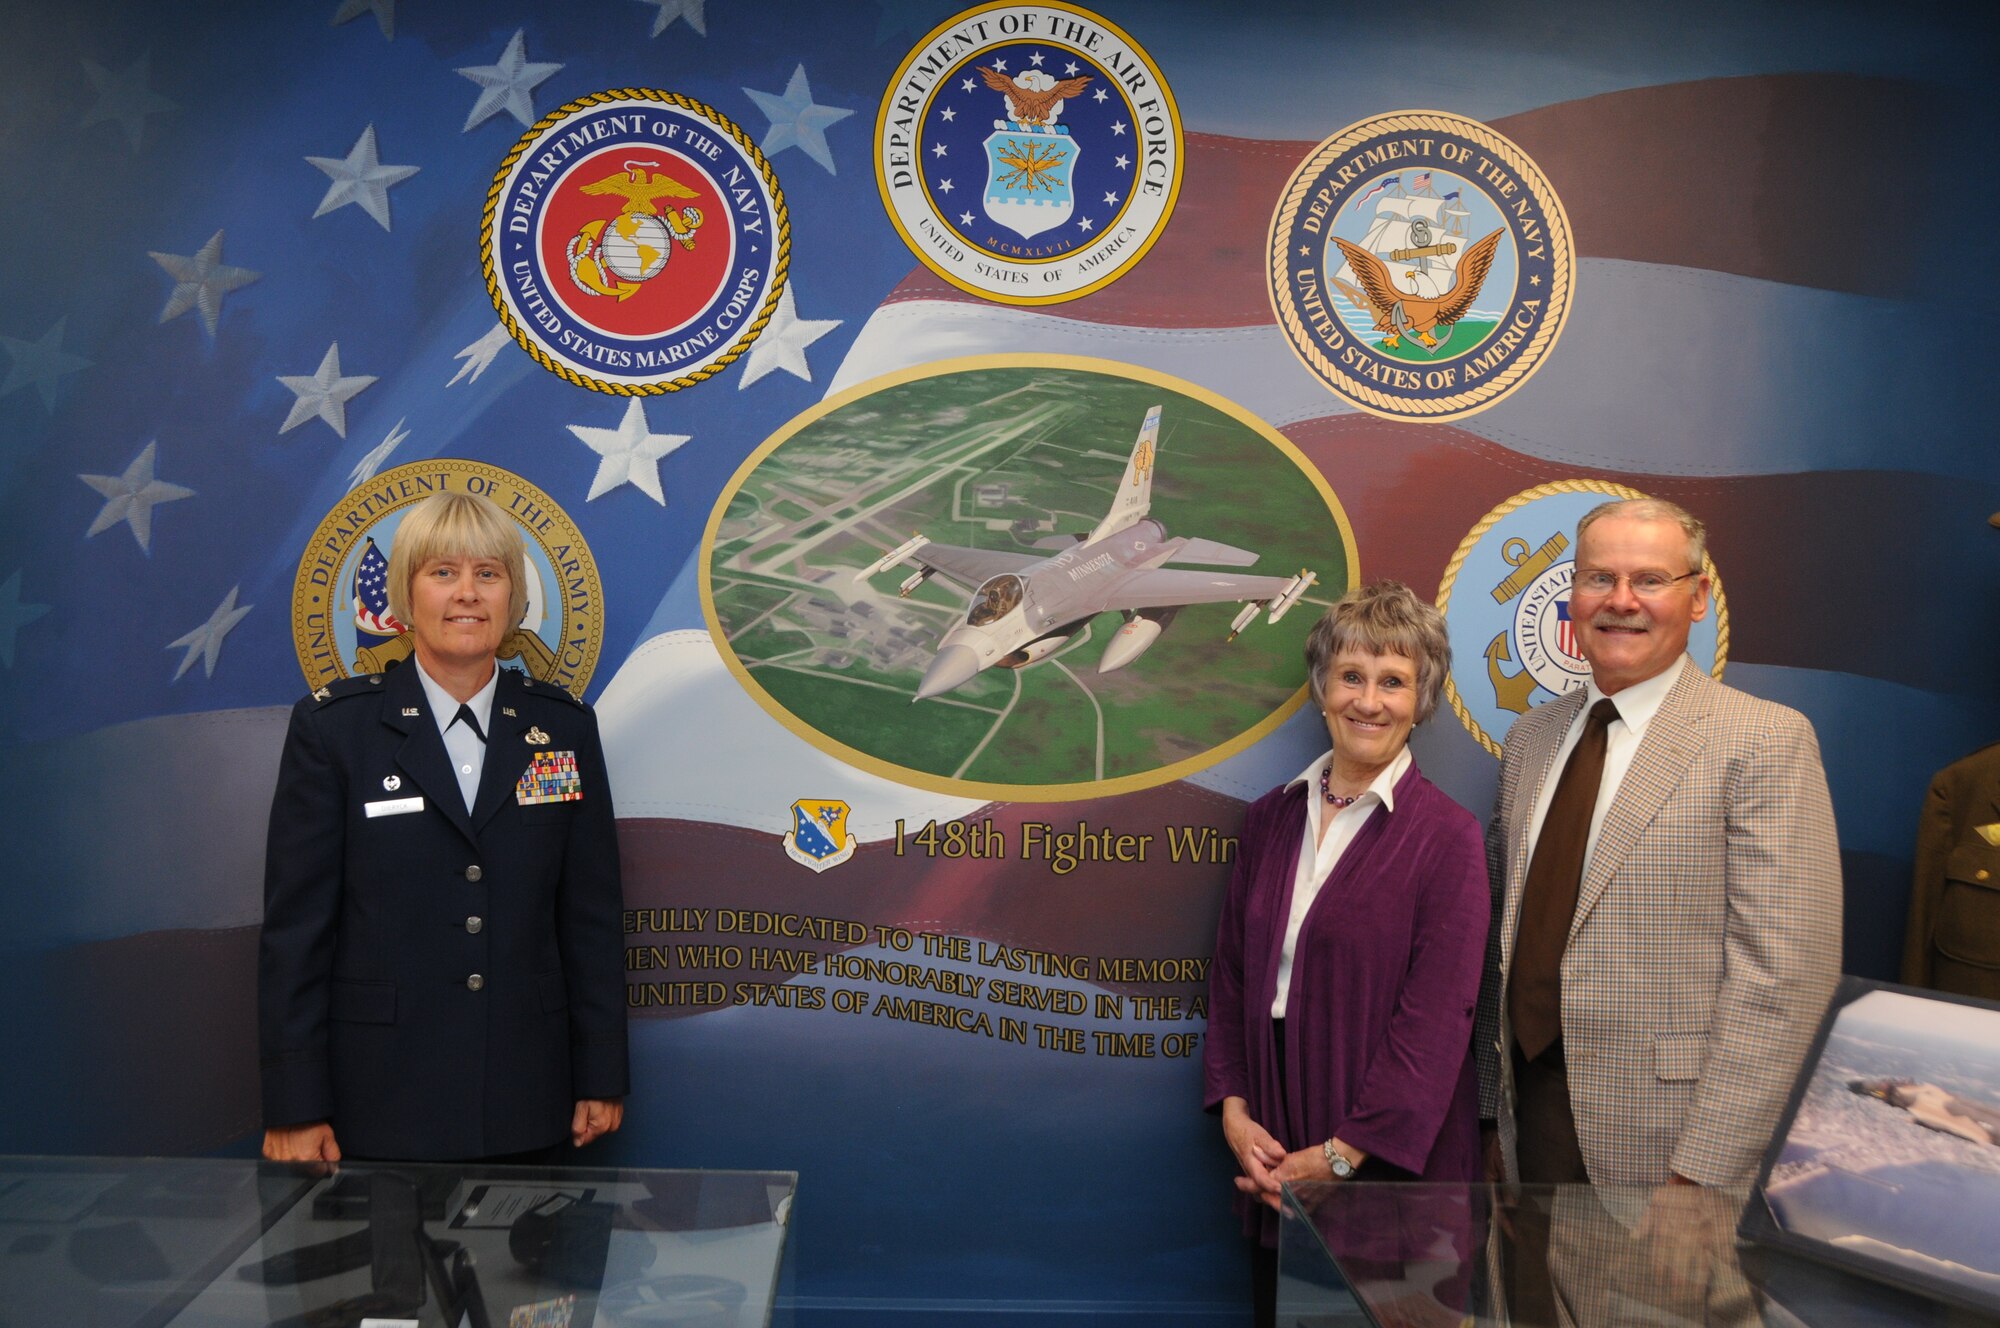 148th Fighter Wing Mission Support Group Commander Col. Penny Dieryck poses
with Hermantown Historical Society Chair Sandy Reinke and Co-Chair Bob
Swanson June 23, 2012 in front of the Society's newly dedicated mural in
their military room.  The mural depicts a 148th Fighter Wing F-16 in flight
surrounded by the seals of the U.S armed forces, and was dedicated to the
service of the area's veterans.  (National Guard photo by Master Sgt. Ralph
J. Kapustka.)